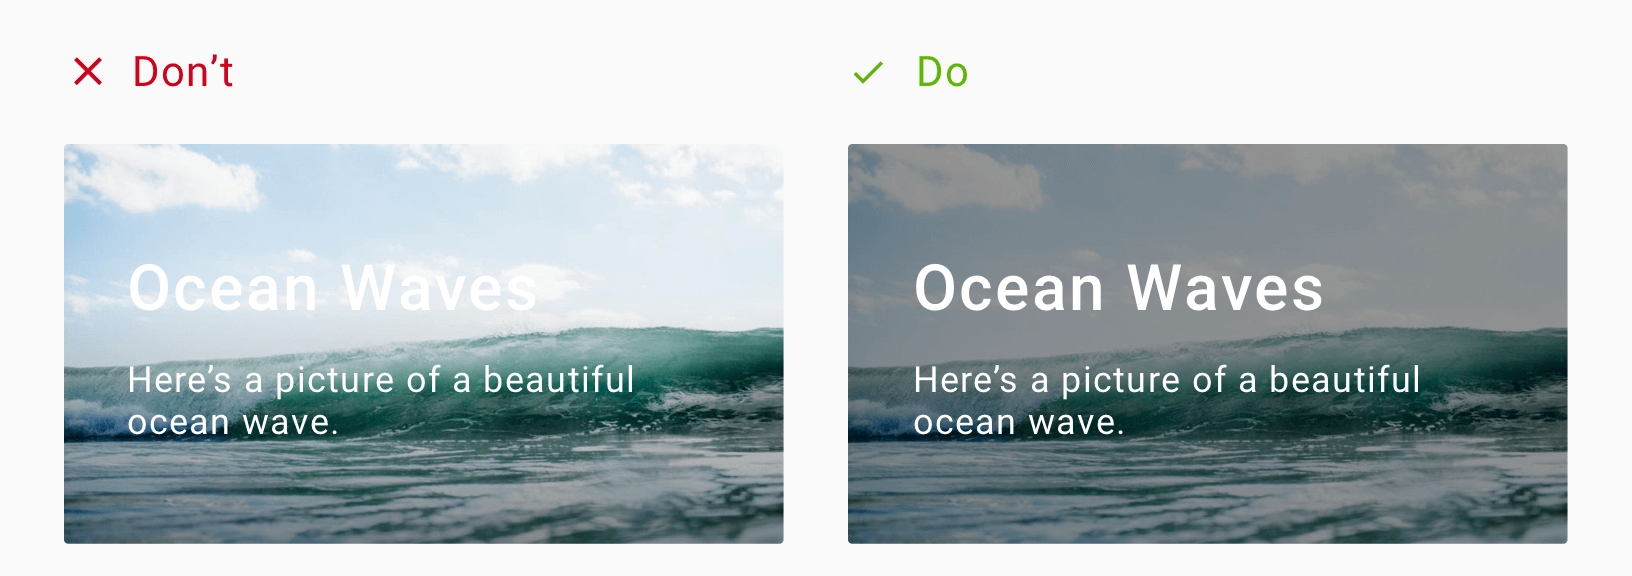 Design Techniques To Display Text Over Background Images